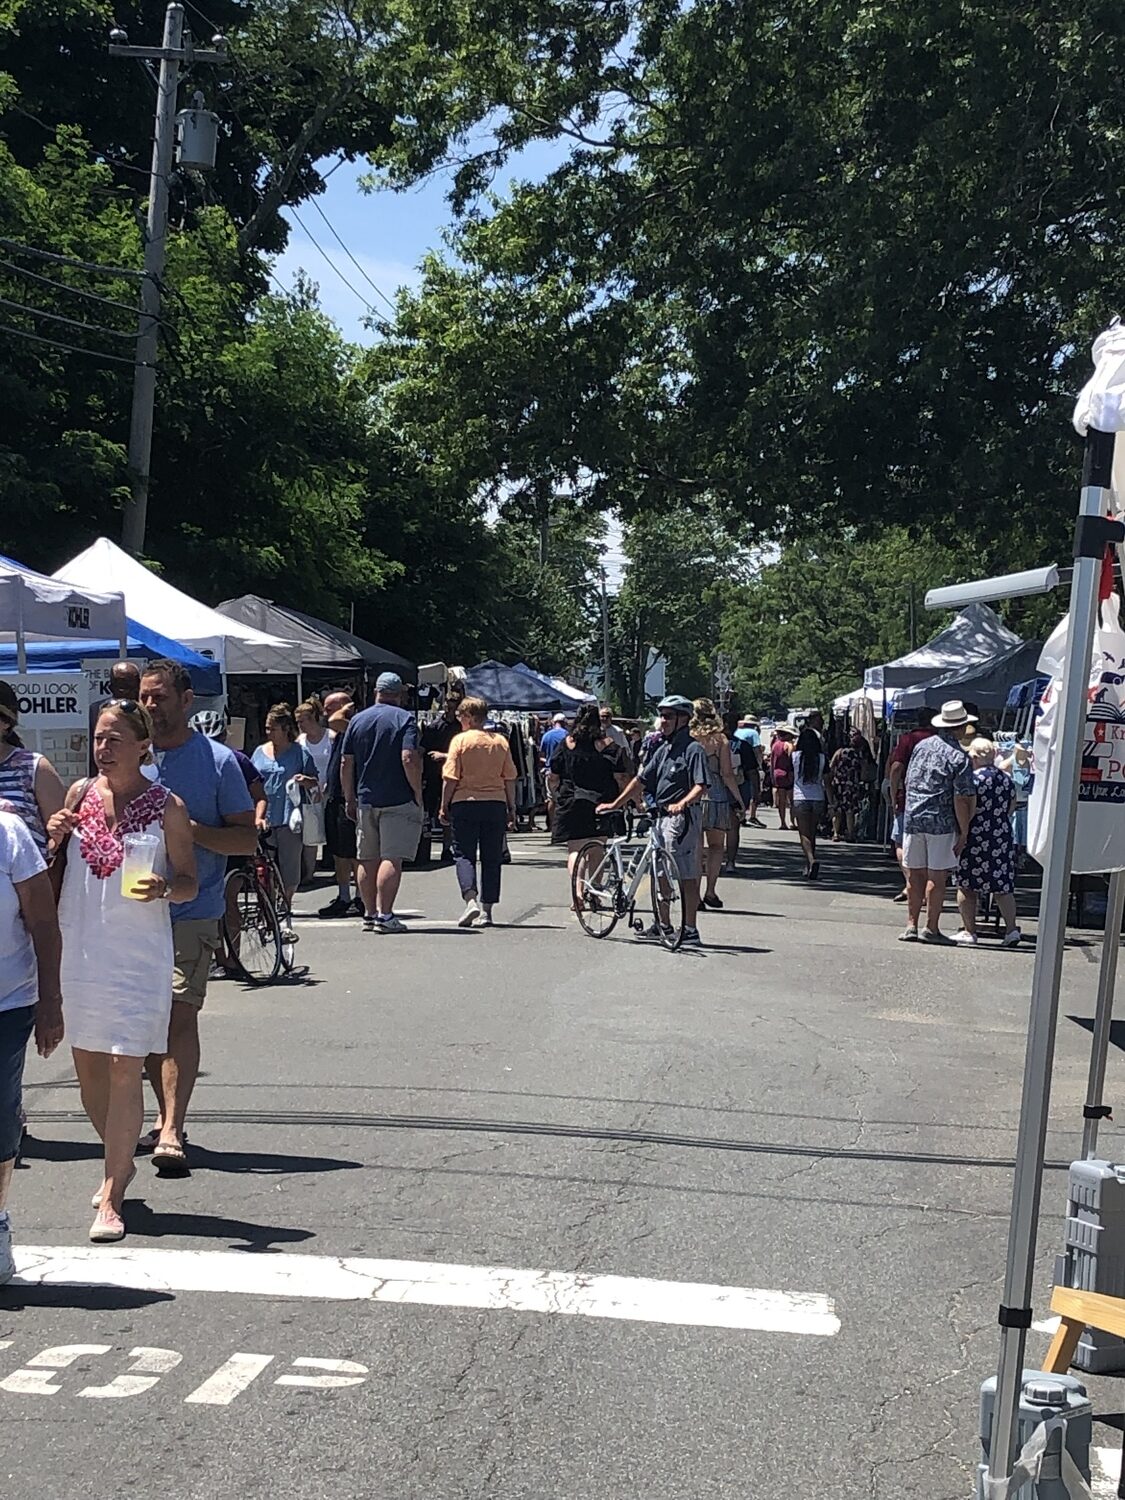 The annual Mattituck Street Fair is held along Old Sound Avenue on the second Saturday of July.